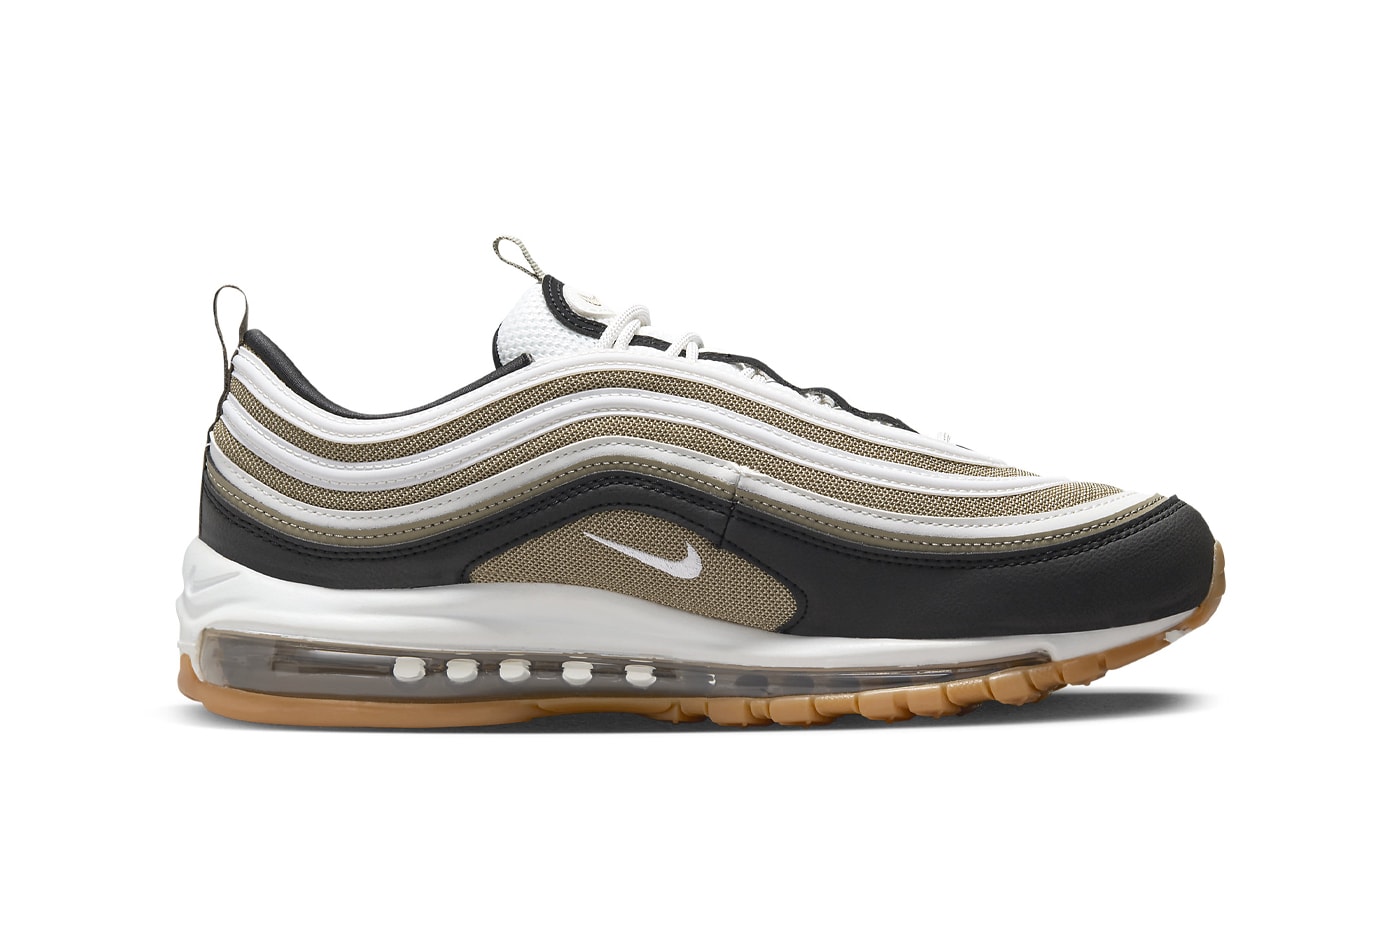 Official Look At the Nike Air Max 97 "Light Olive" 921826-203 cactus jack neutral brown gum soles